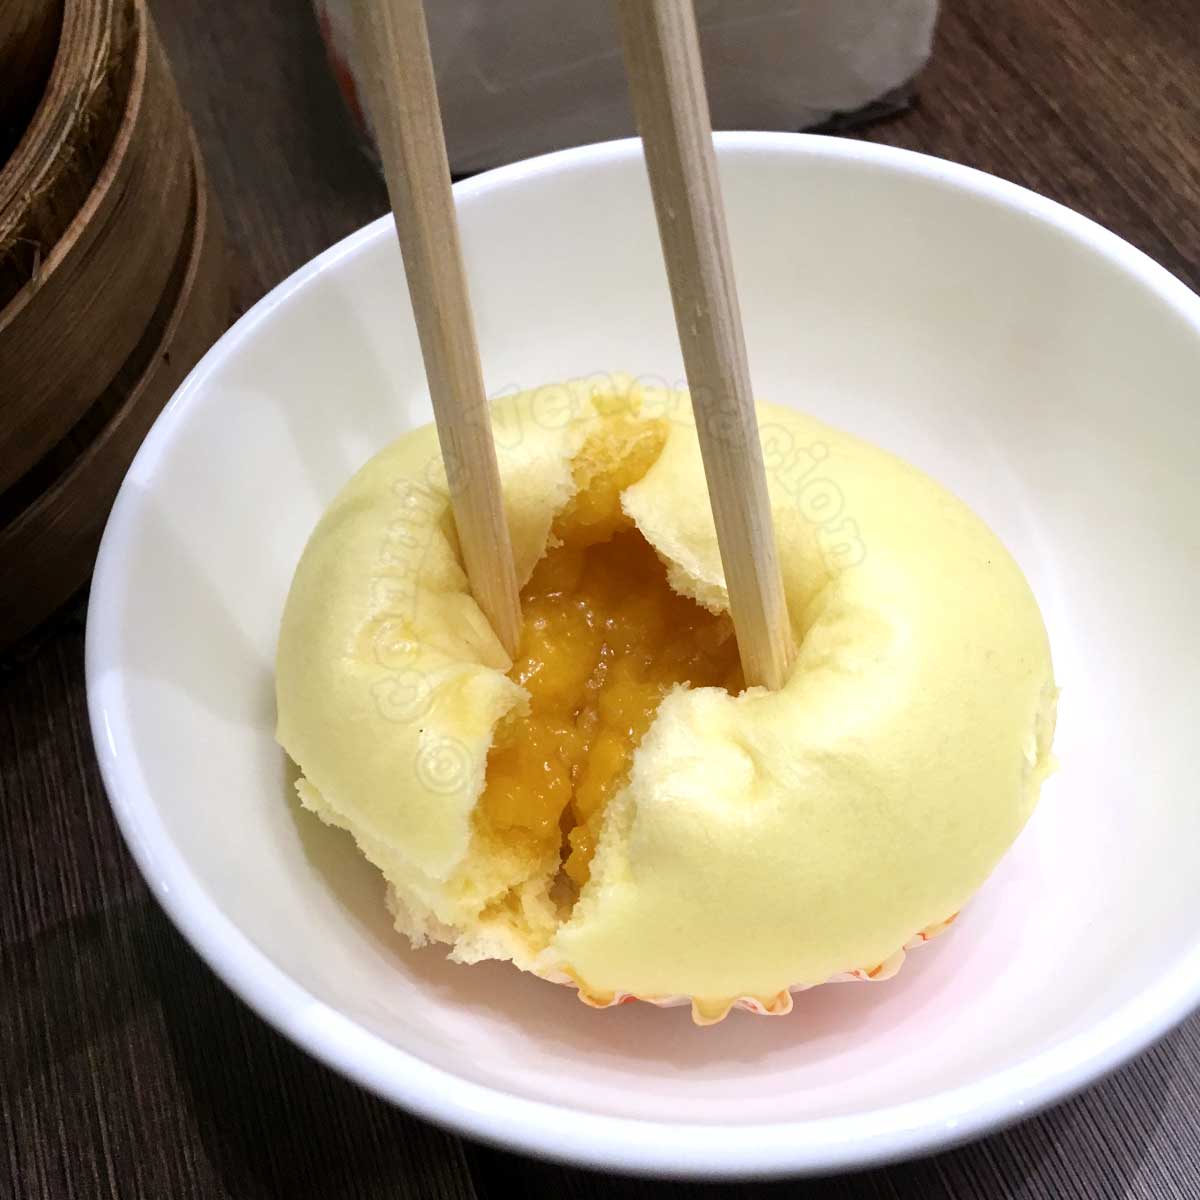 Steamed sweet buns with salted duck egg yolk filling